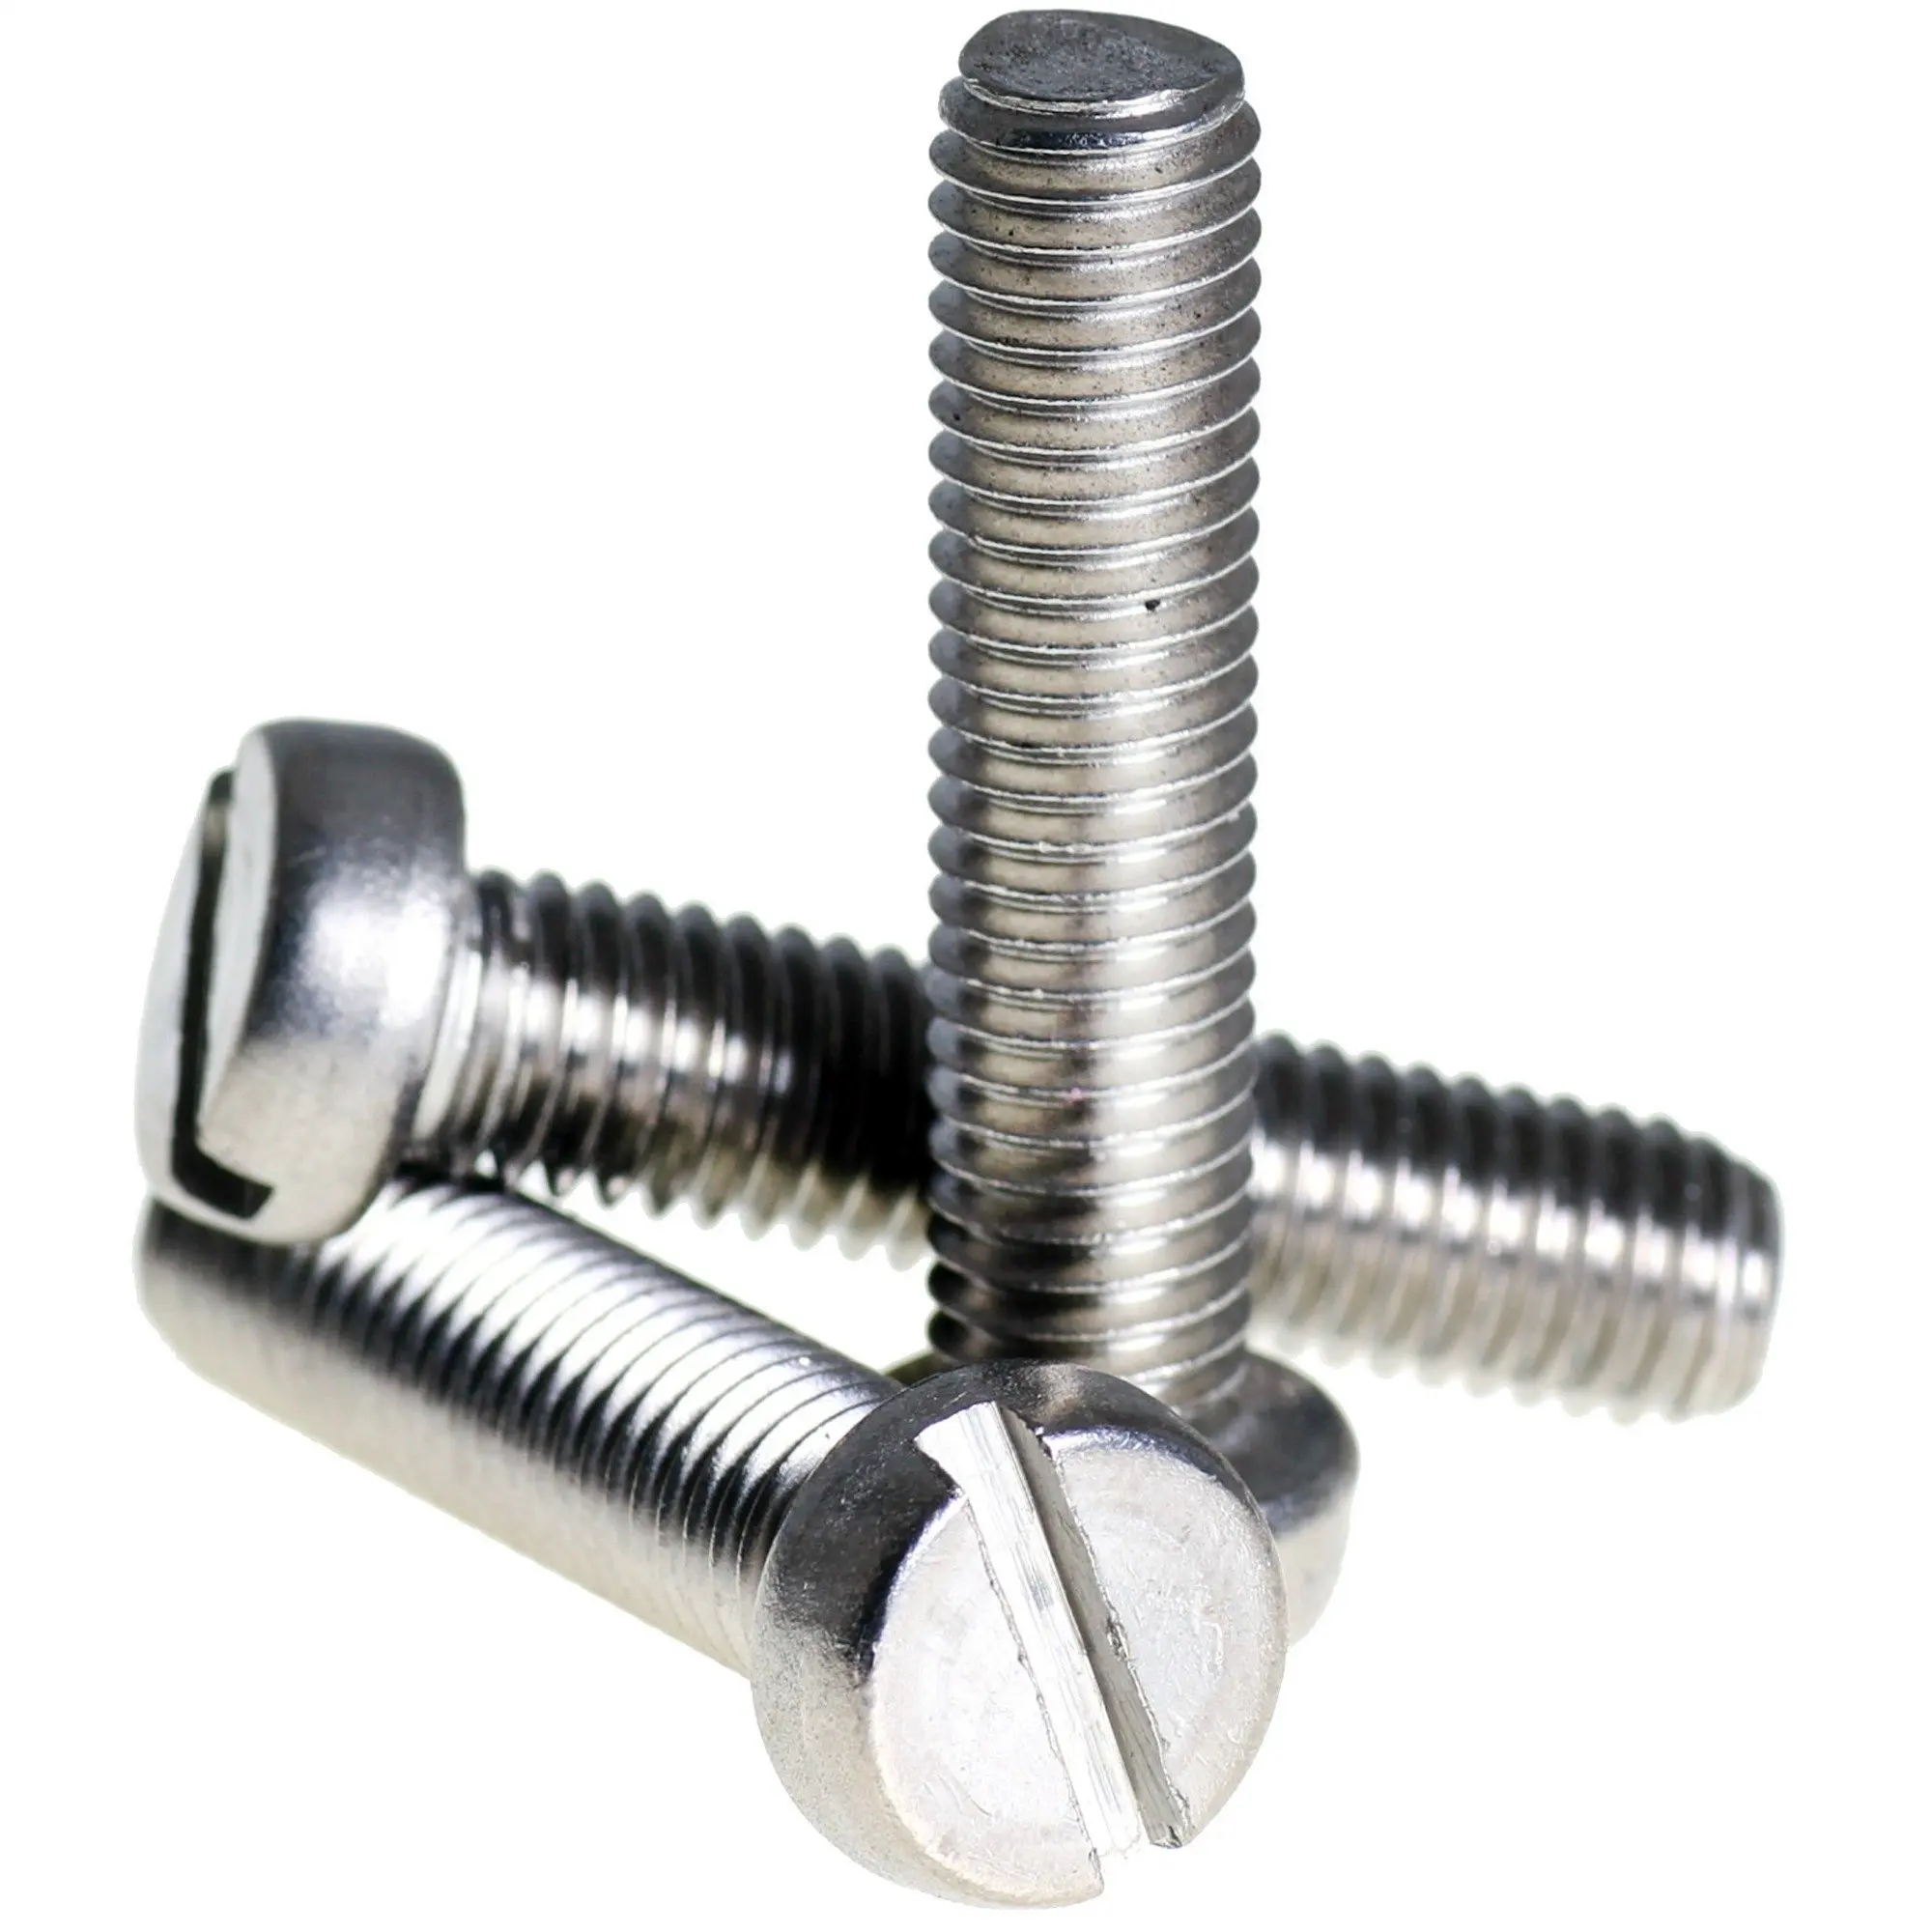 M3 M4 M5 A4 STEEL STAINLESS MACHINE SCREWS FLAT HEAD COUNTERSUNK SLOTTED BOLTS 